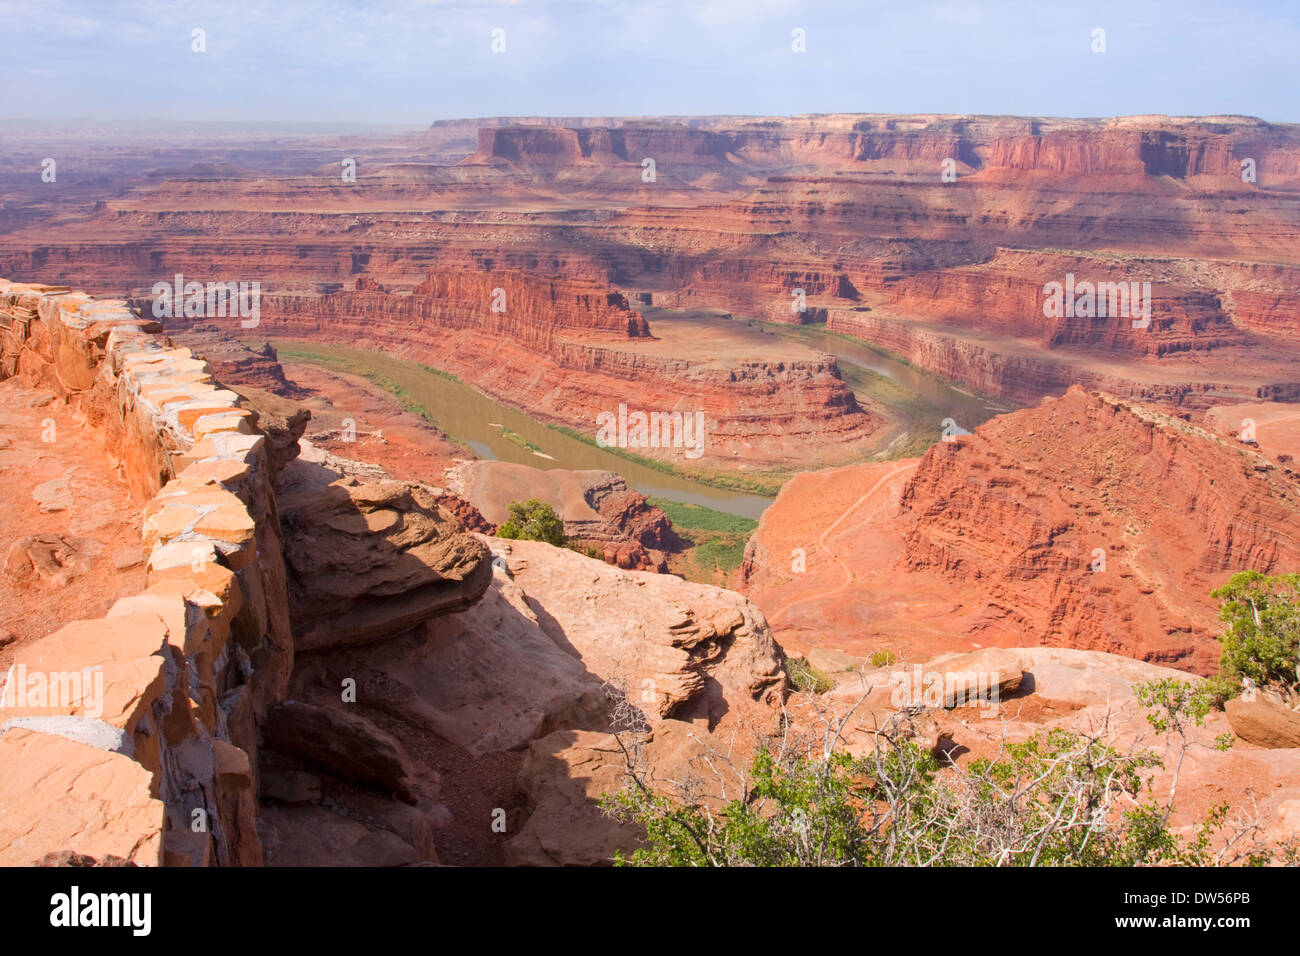 Dead Horse Point State Park, Canyonlands, Utah Foto Stock